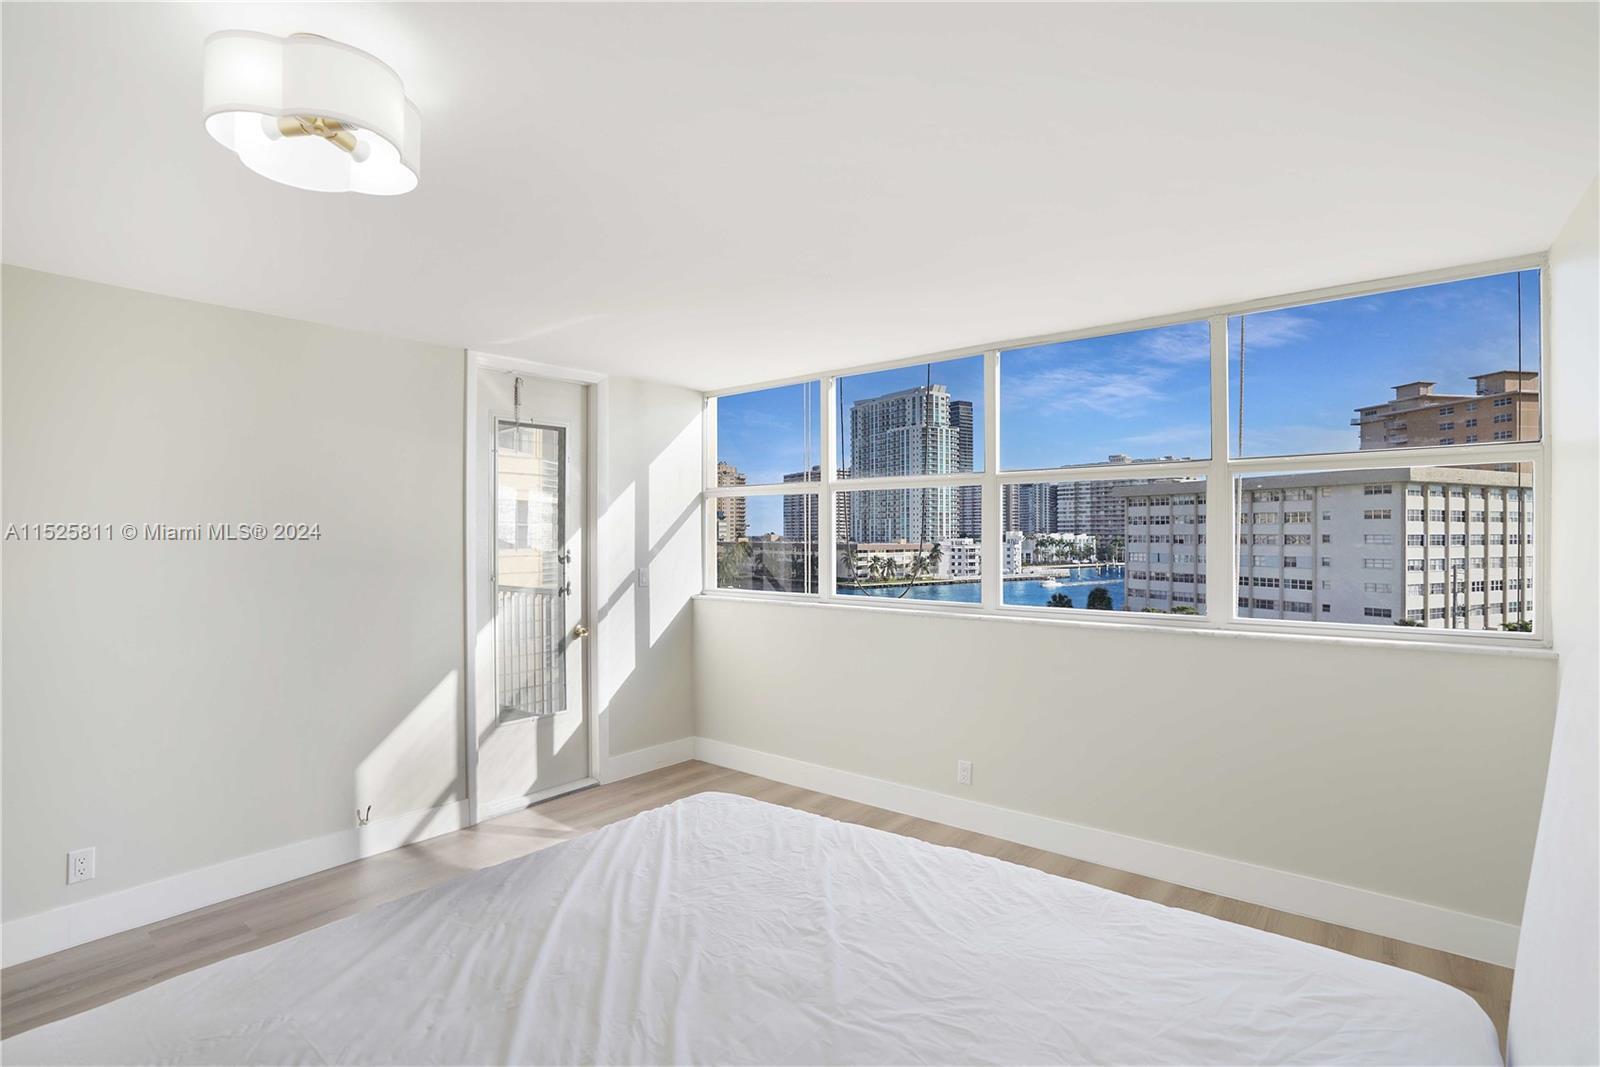 Amazing 1/1 condo with almost 1000 ft living area, spectacular views from every room. Remodeled kitc